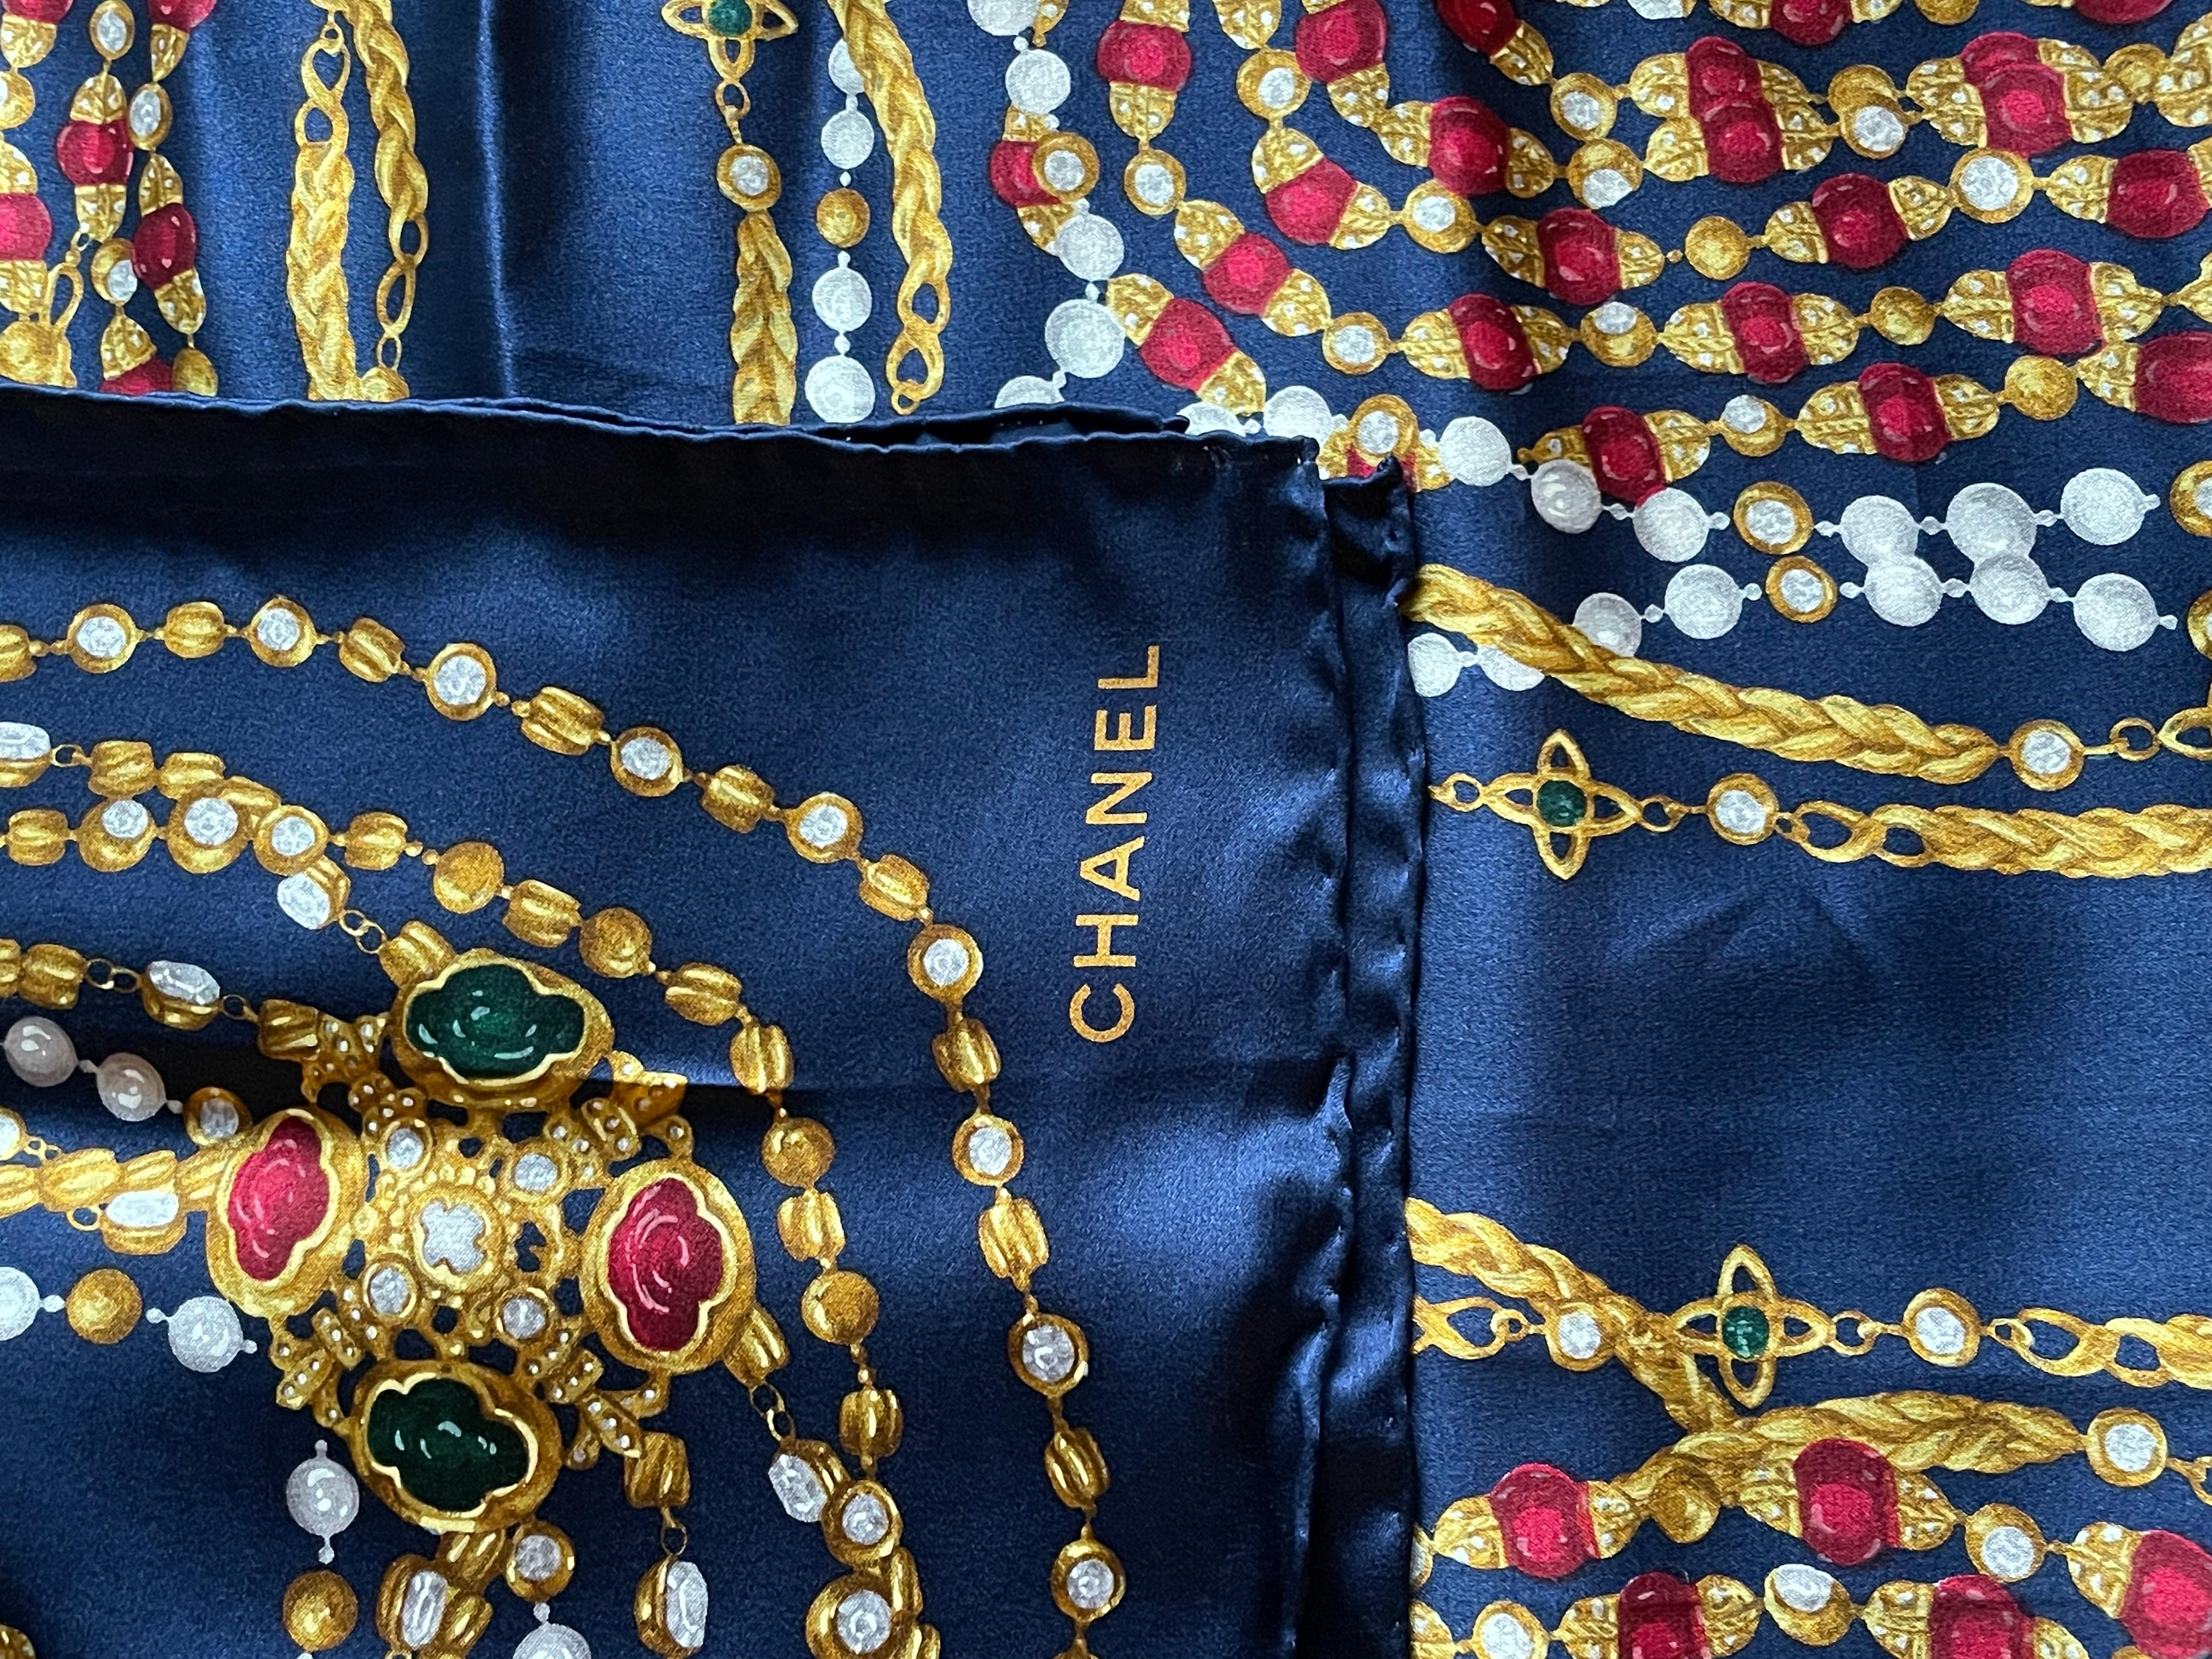 DETAILS

• signed CHANEL

• CC Chanel gripoix necklace print

• navy blue with gold, pearl and jewel tone 

• vintage designer runway scarf

  100% silk  

MEASUREMENTS  

• 34” x 34”

VINTAGE CHANEL SCARF

CONDITION

•  excellent vintage condition